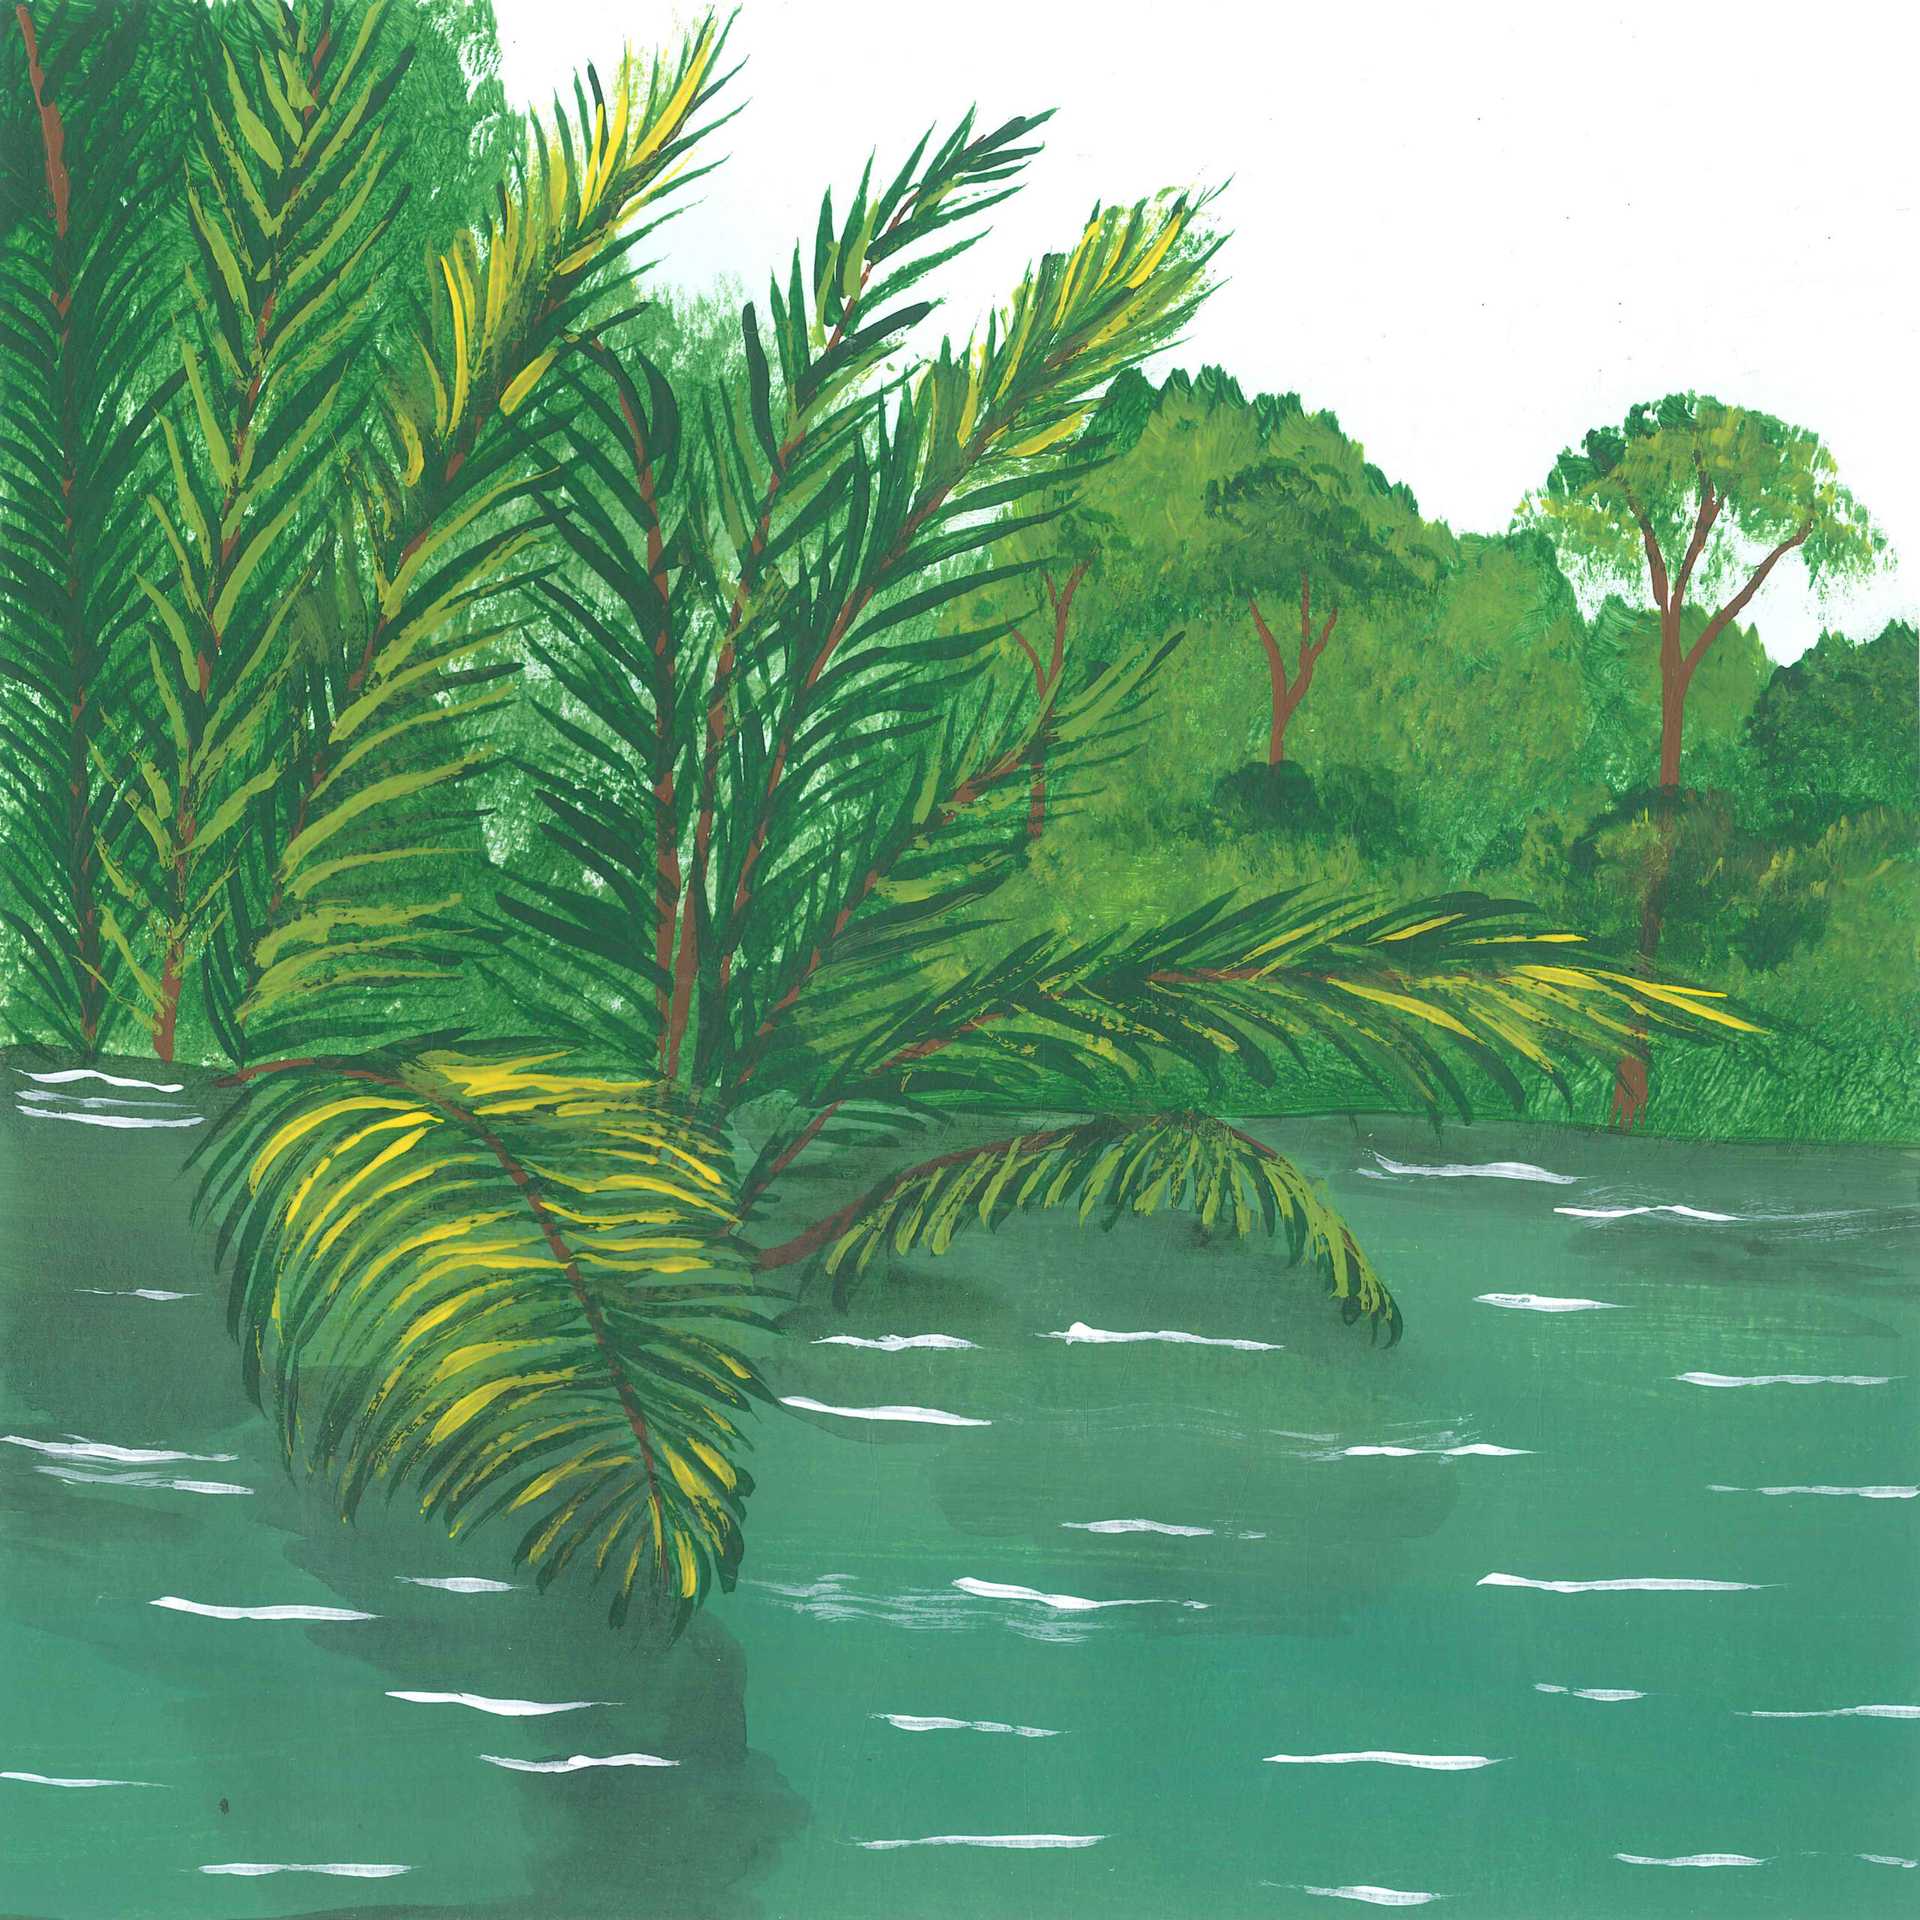 Jungle Lake Deep in the Amazon Rainforest - nature landscape painting - earth.fm